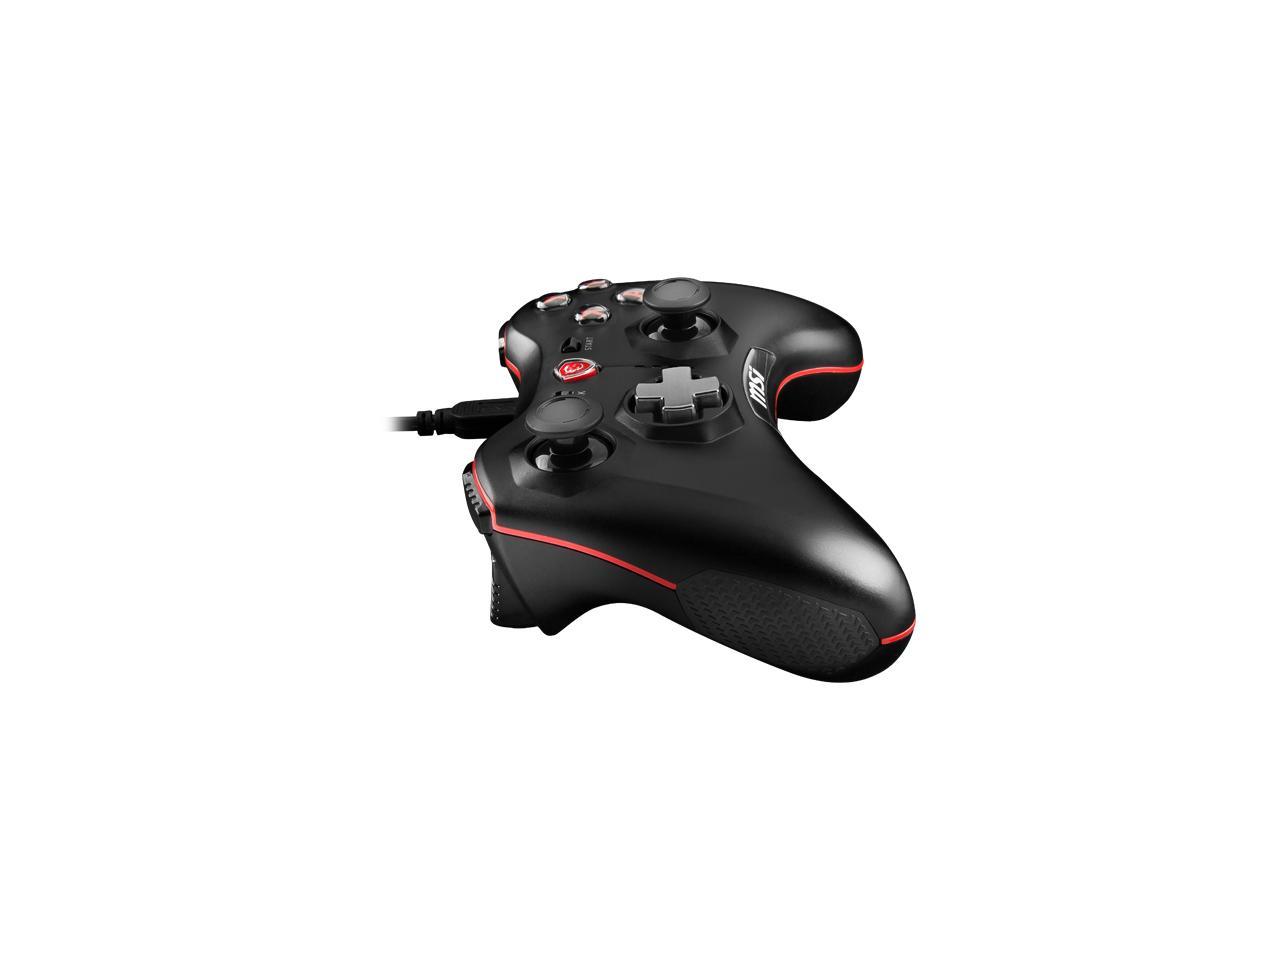 MSI Gift - AC Force GC20 GAMING Controller Wired 2m USB PC Android devices PS3